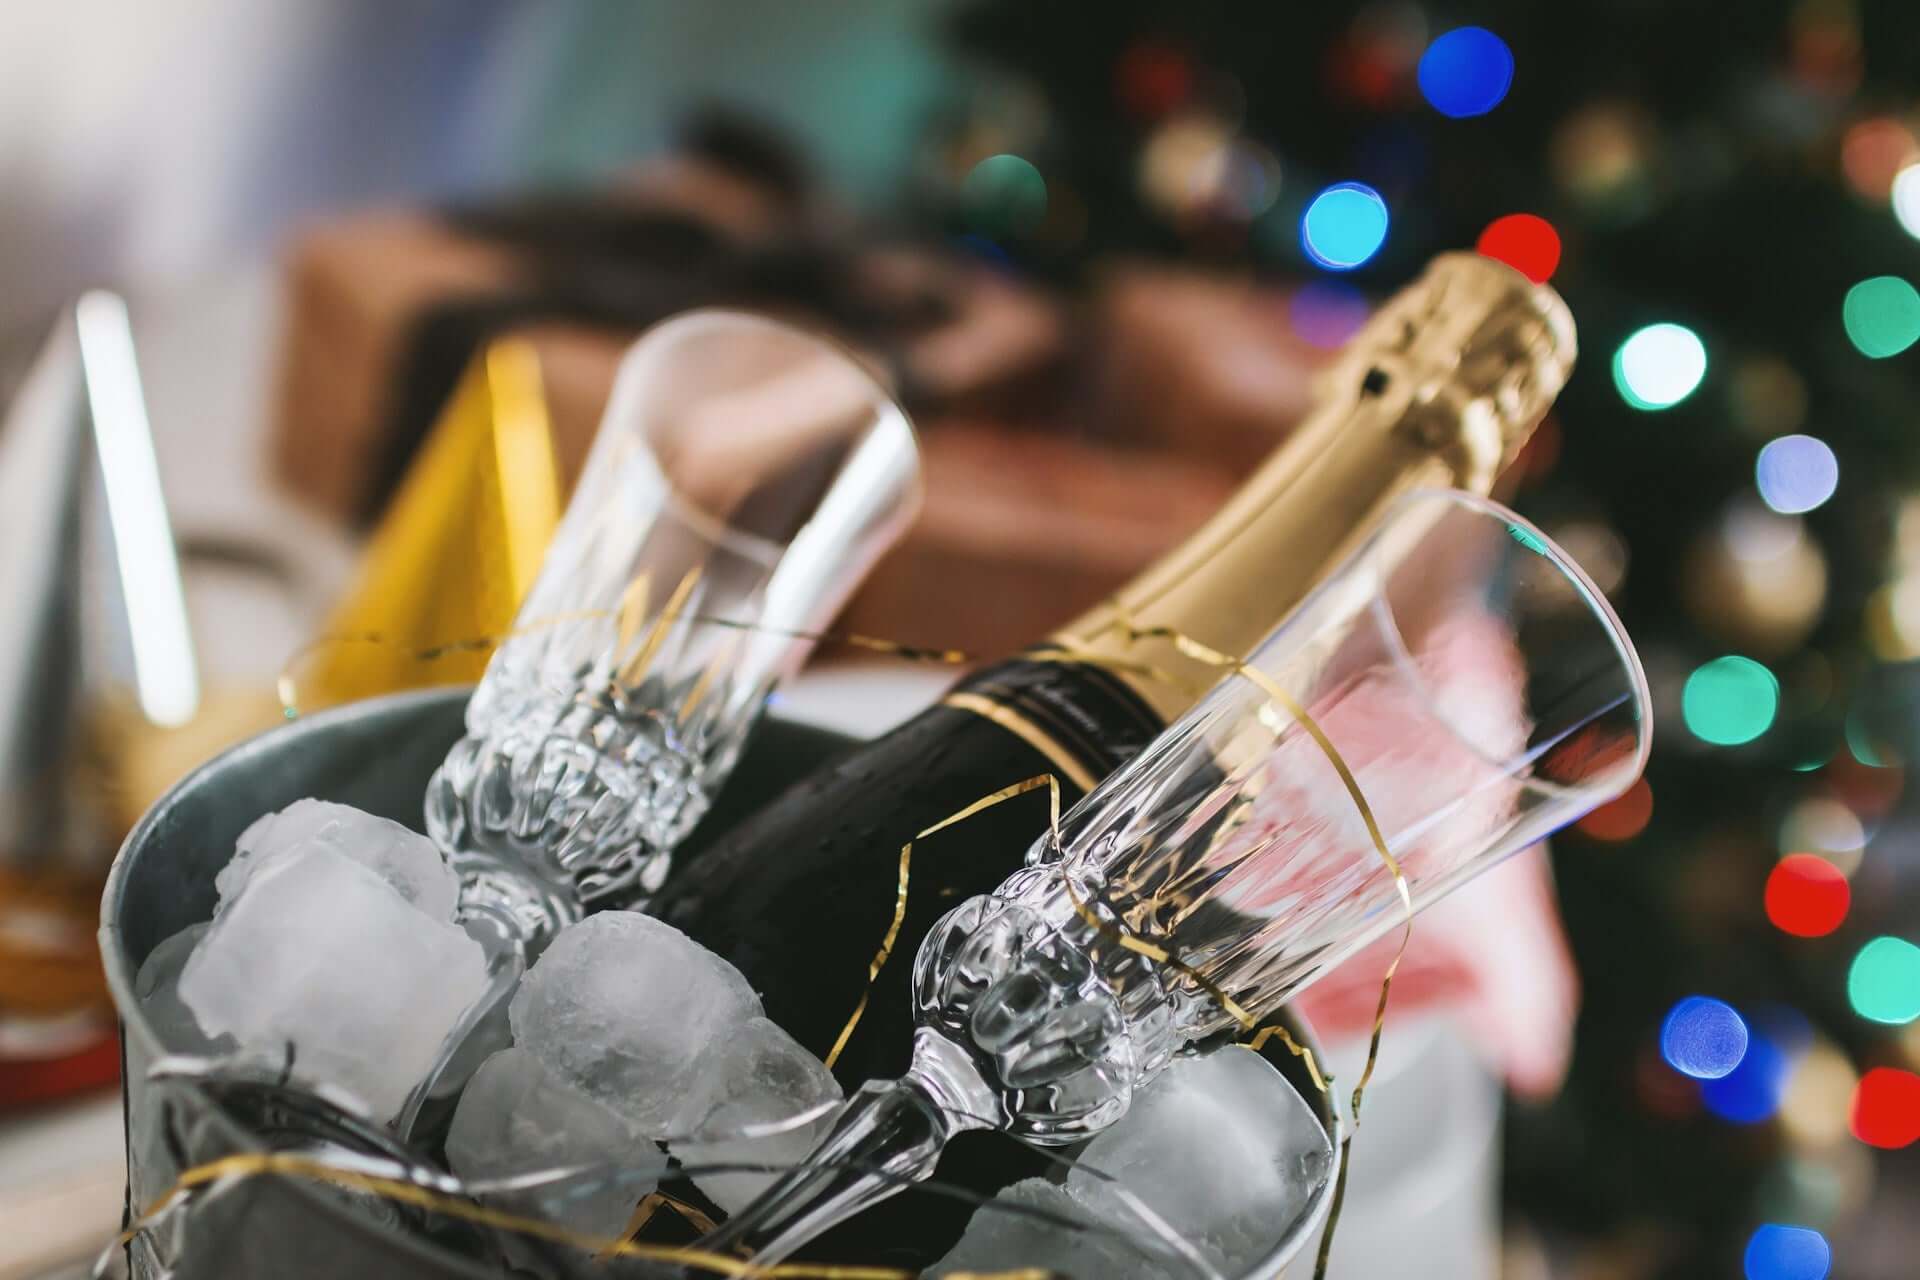 A bottle of sparkling wine and two glasses in a bucket of ice, with fairy lights in the background.